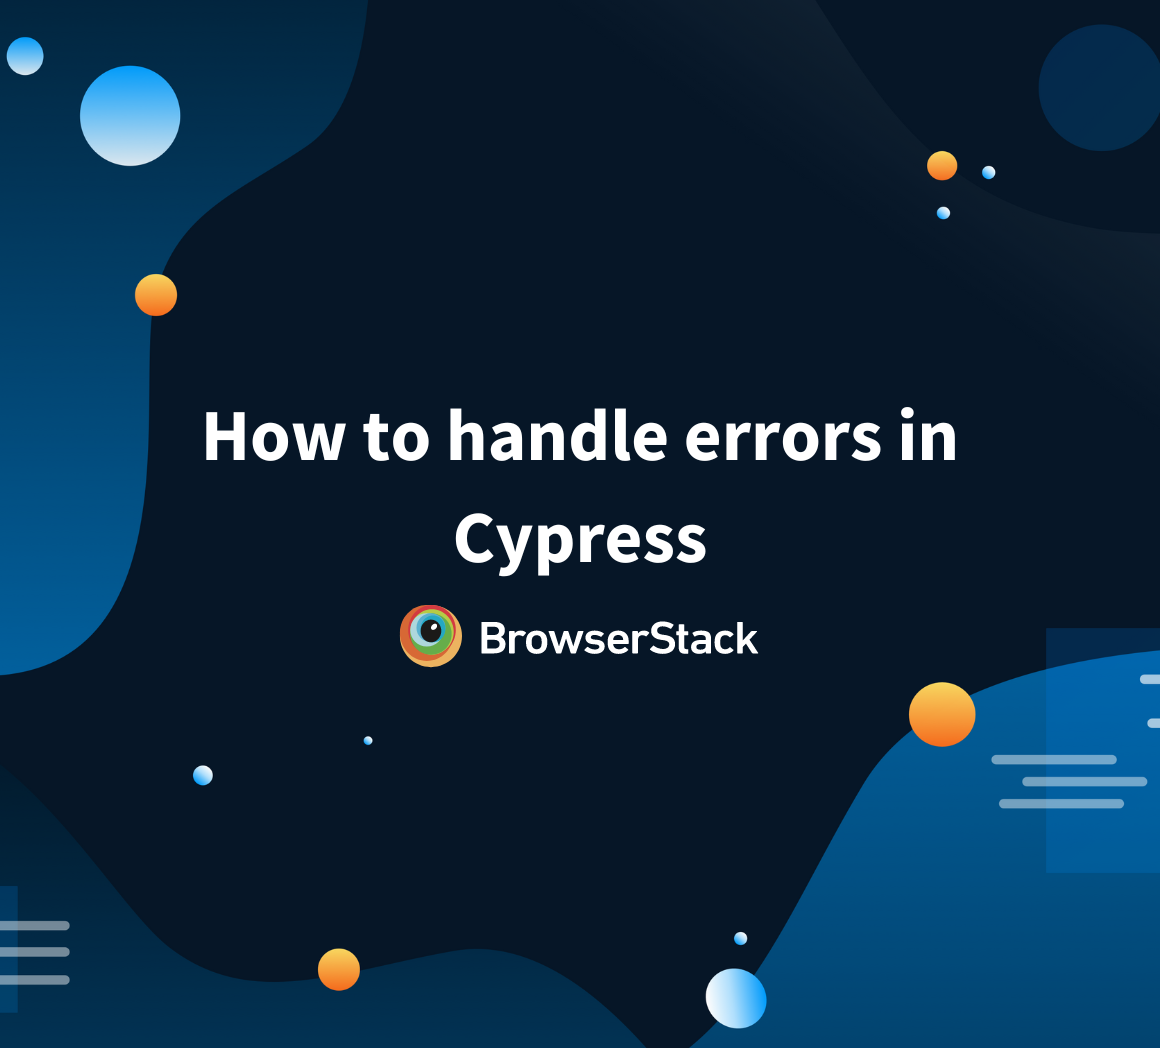 How to handle errors in Cypress